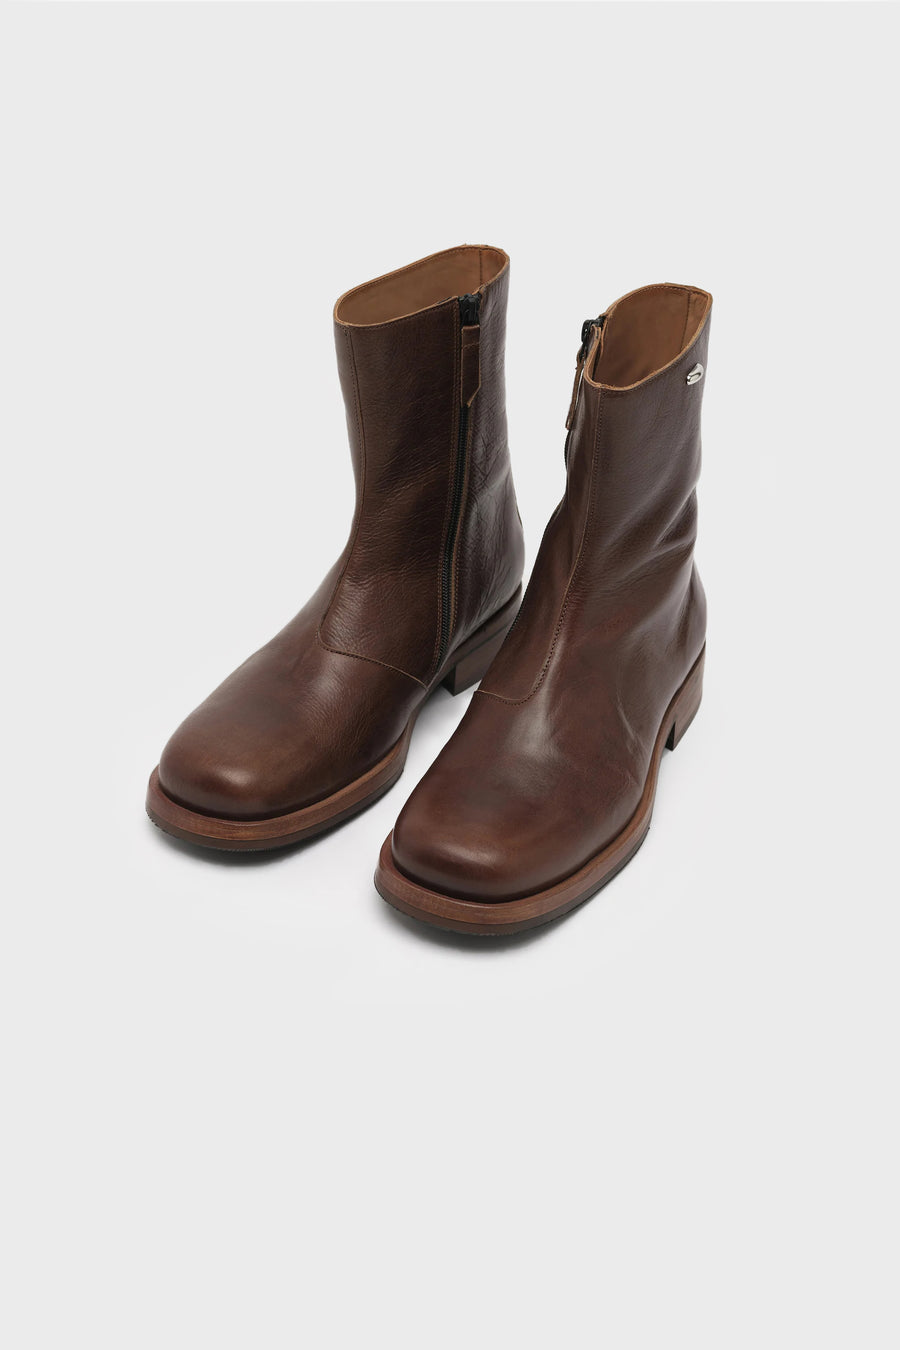 Woodstock Leather Camion Boot Brown